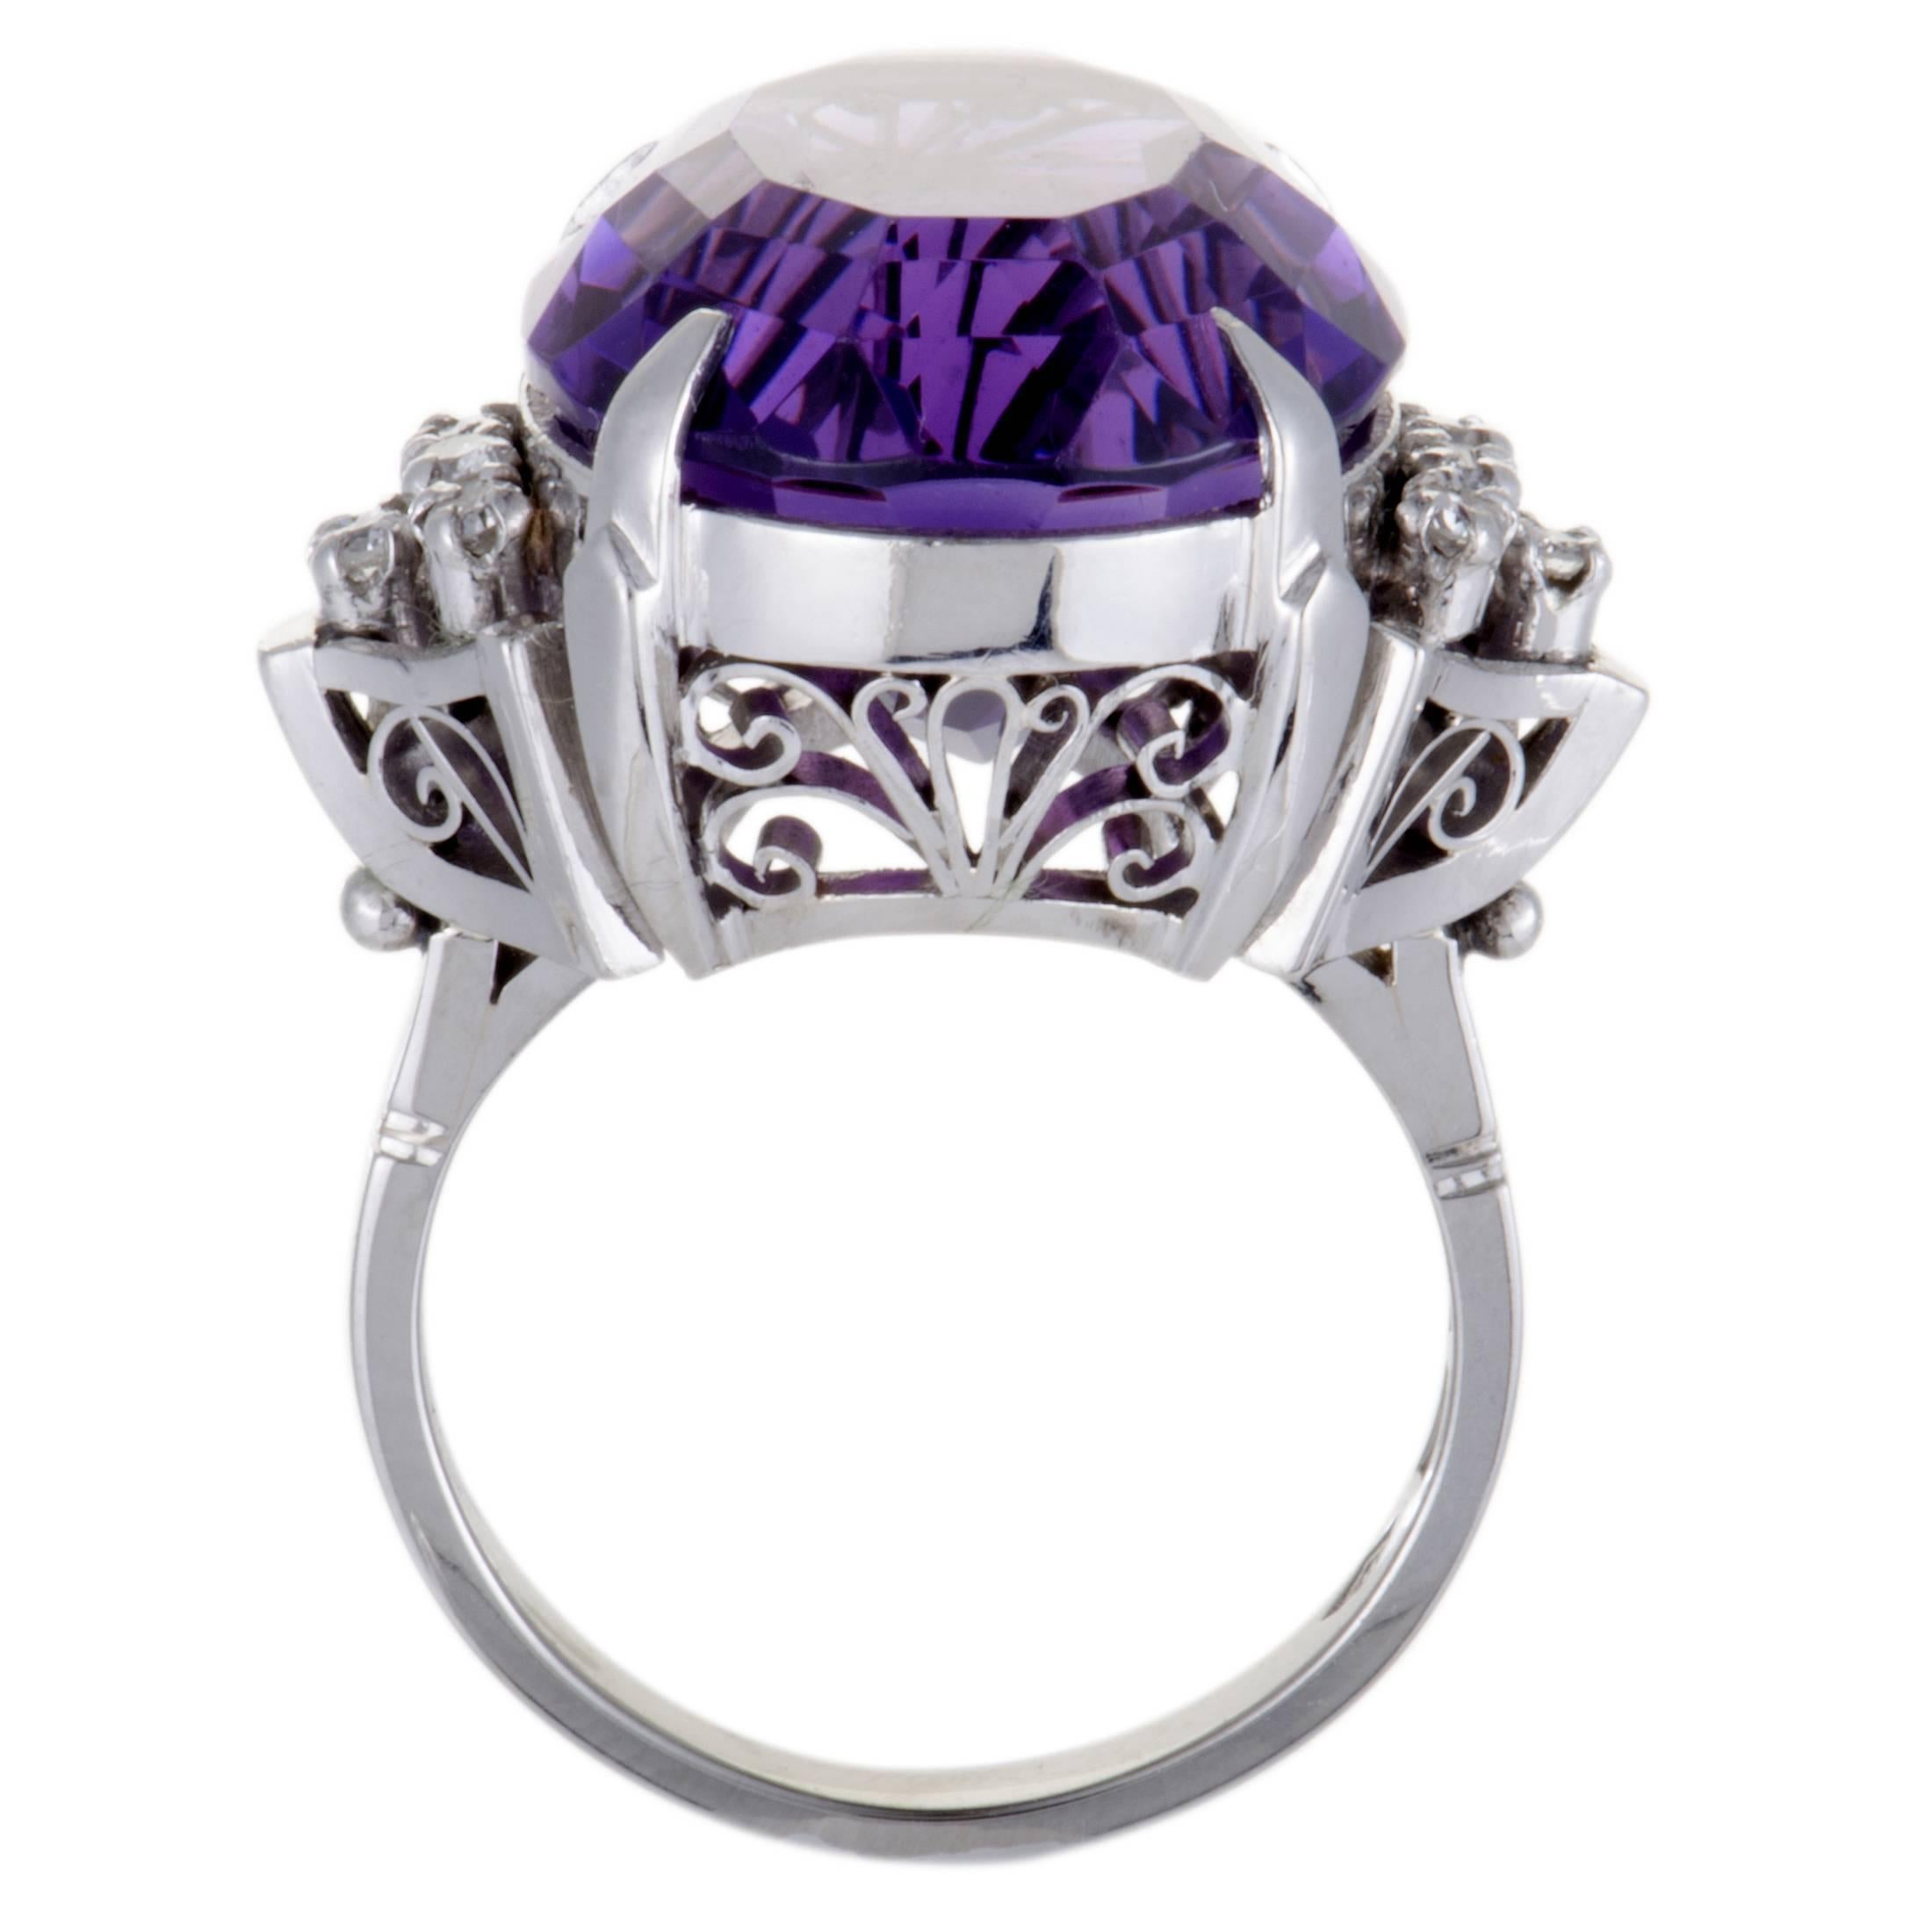 An imposing amethyst steals the limelight in this fabulous platinum cocktail ring that offers an extraordinarily eye-catching appearance. The amethyst weighs approximately 19.00 carats and it is accentuated by glistening diamond stones that amount